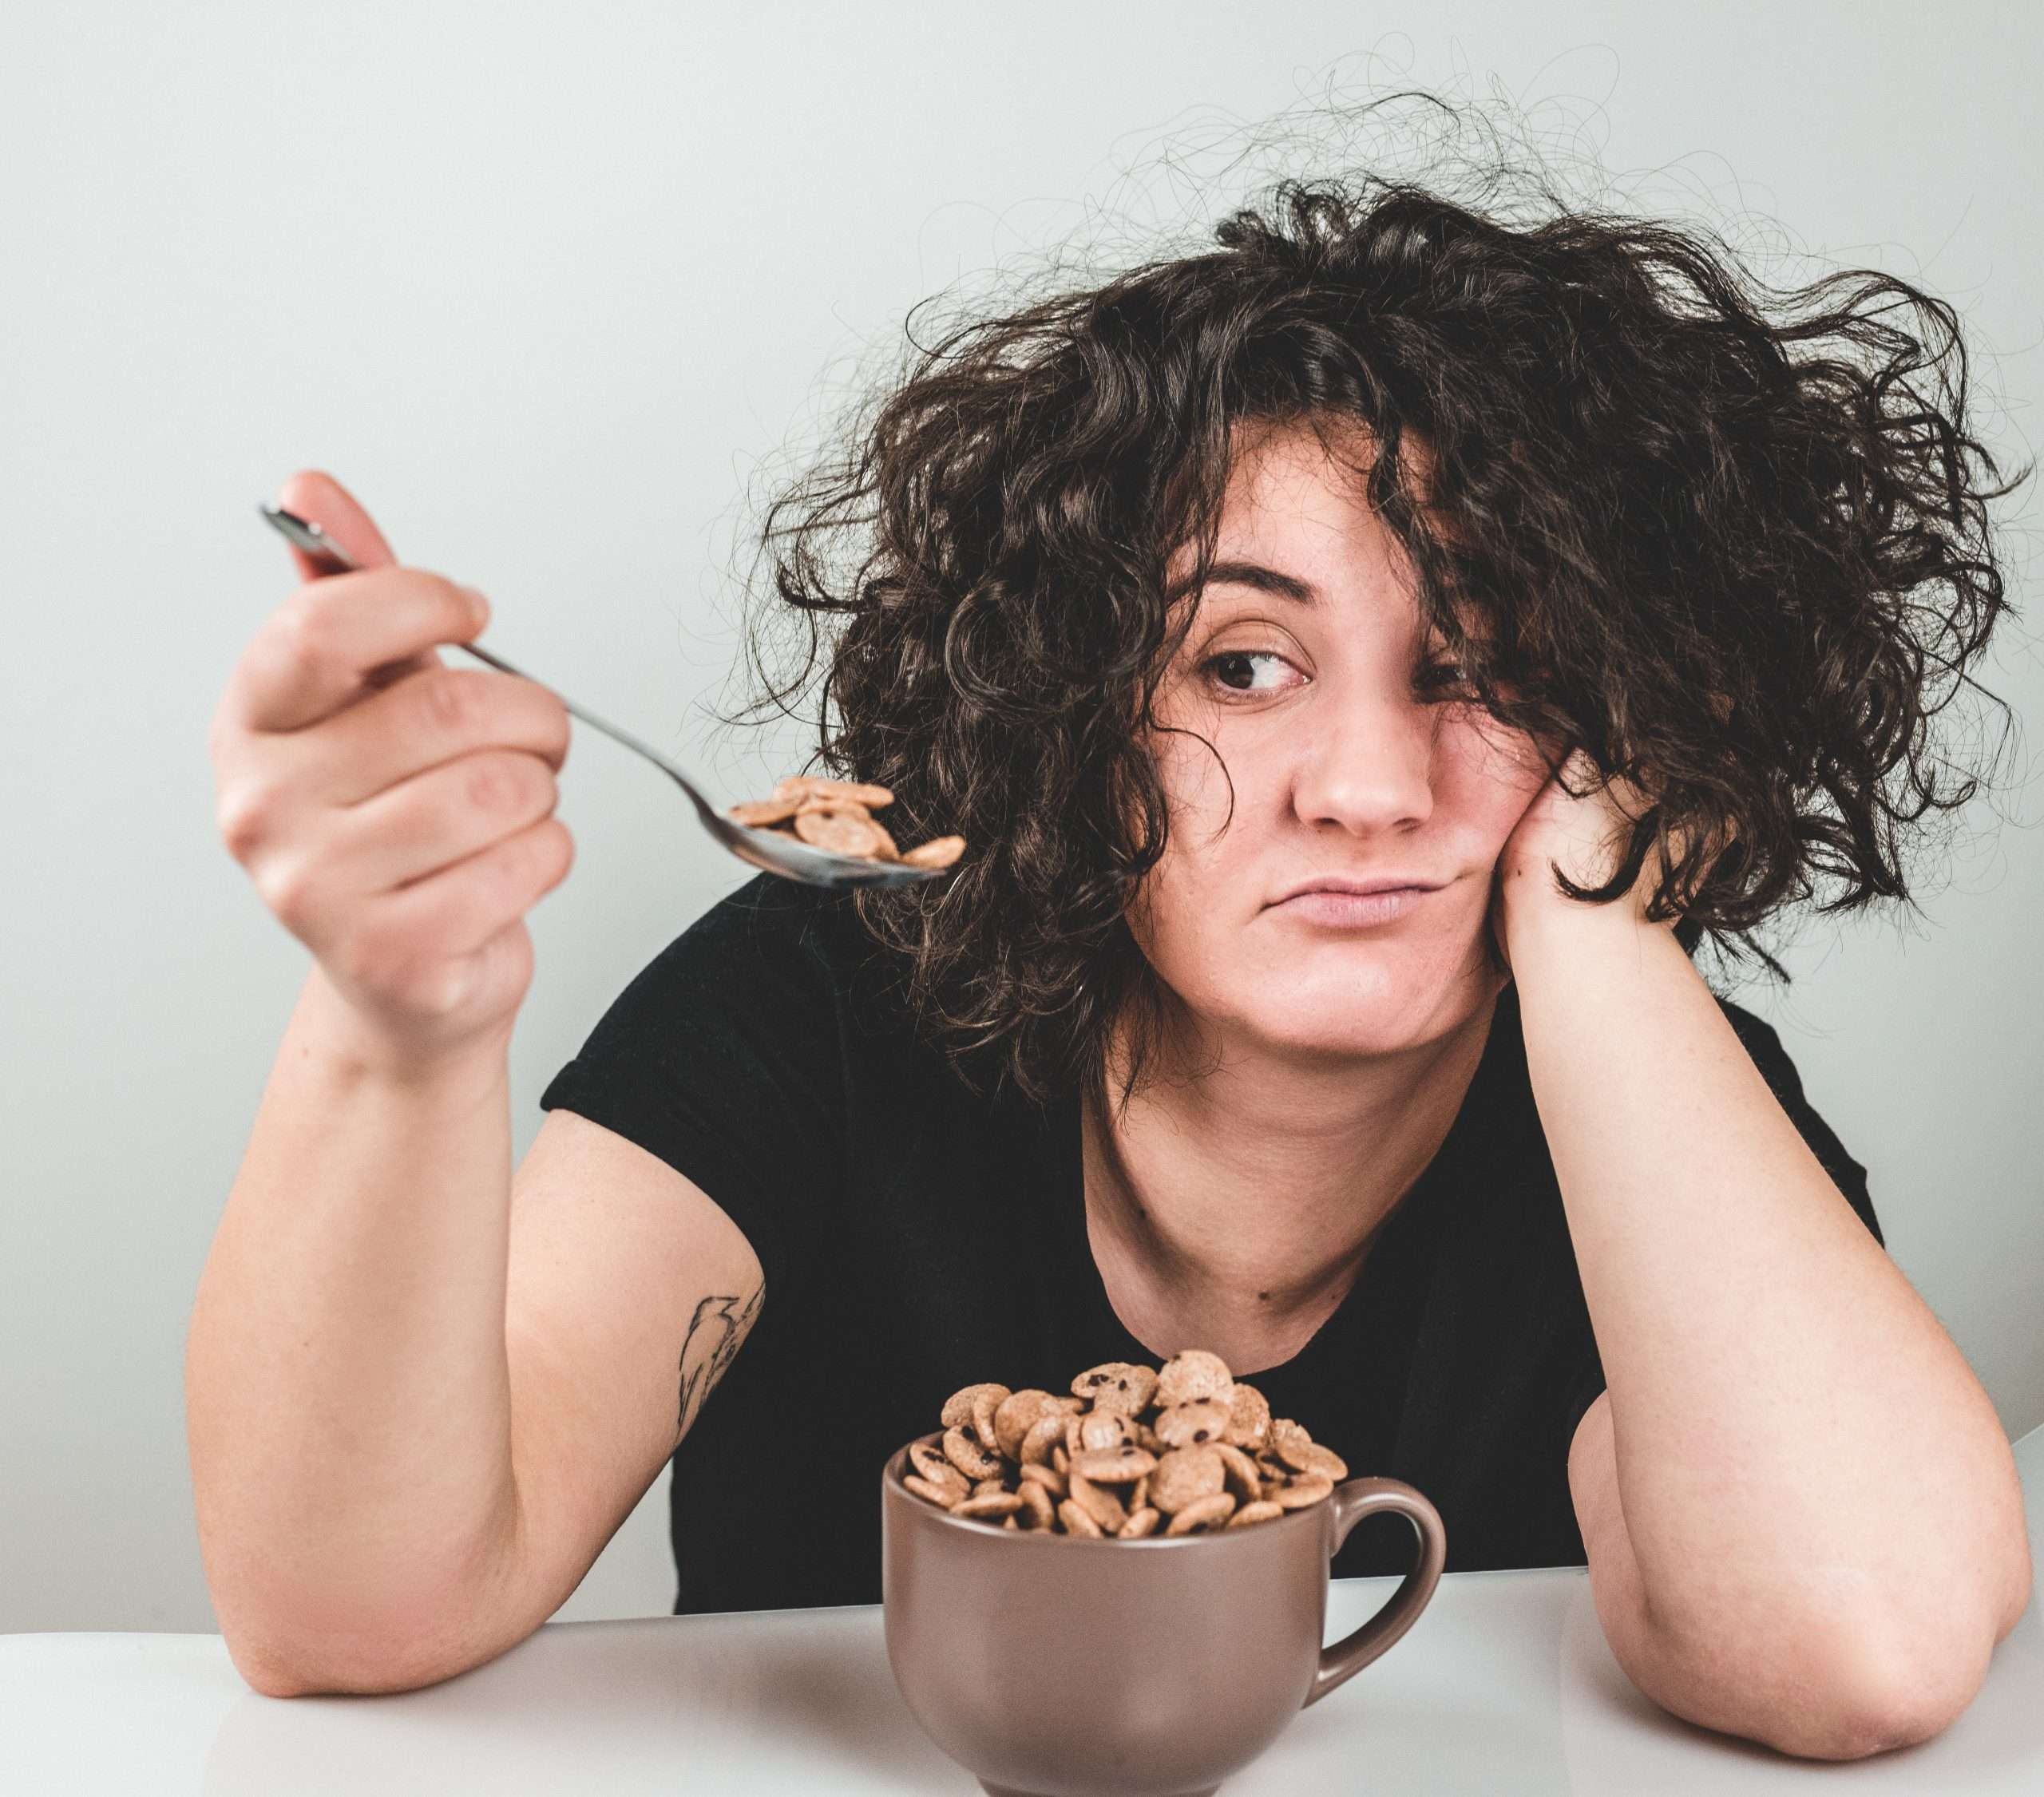 Woman looking at spoonful of cereal with quirky expression. Meant to show one way a person handles stress.